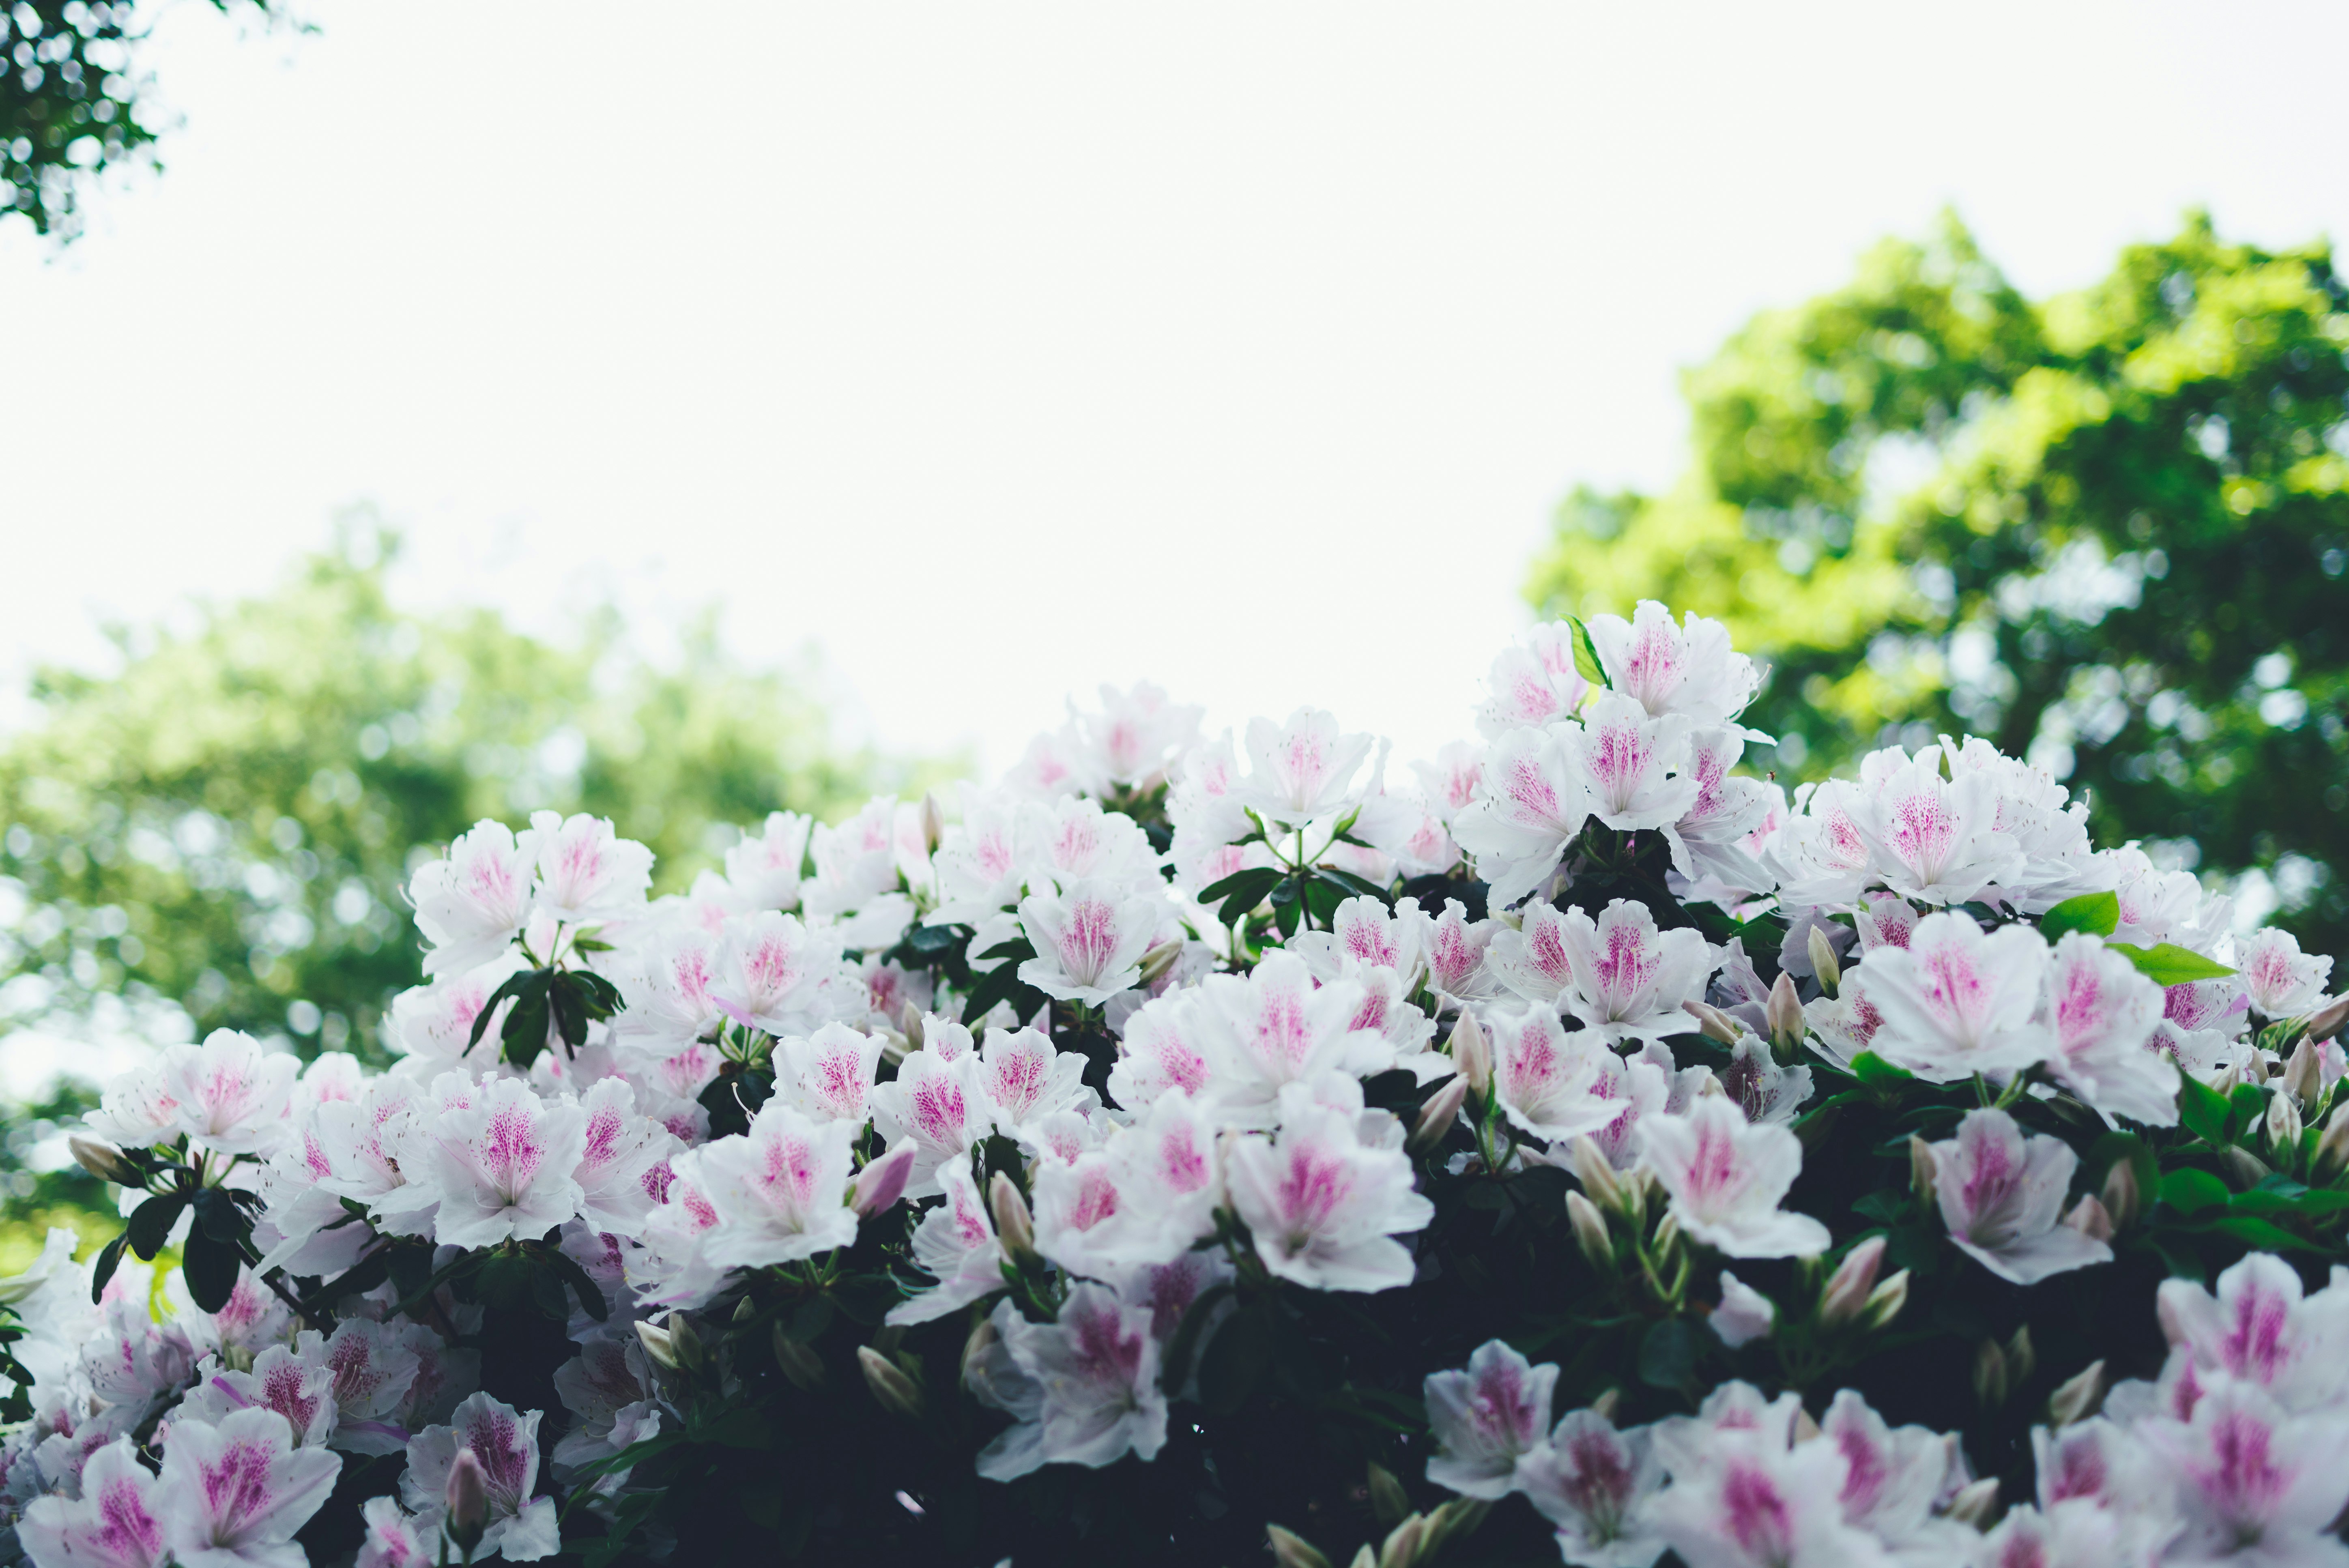 pink-and-white petaled flowers